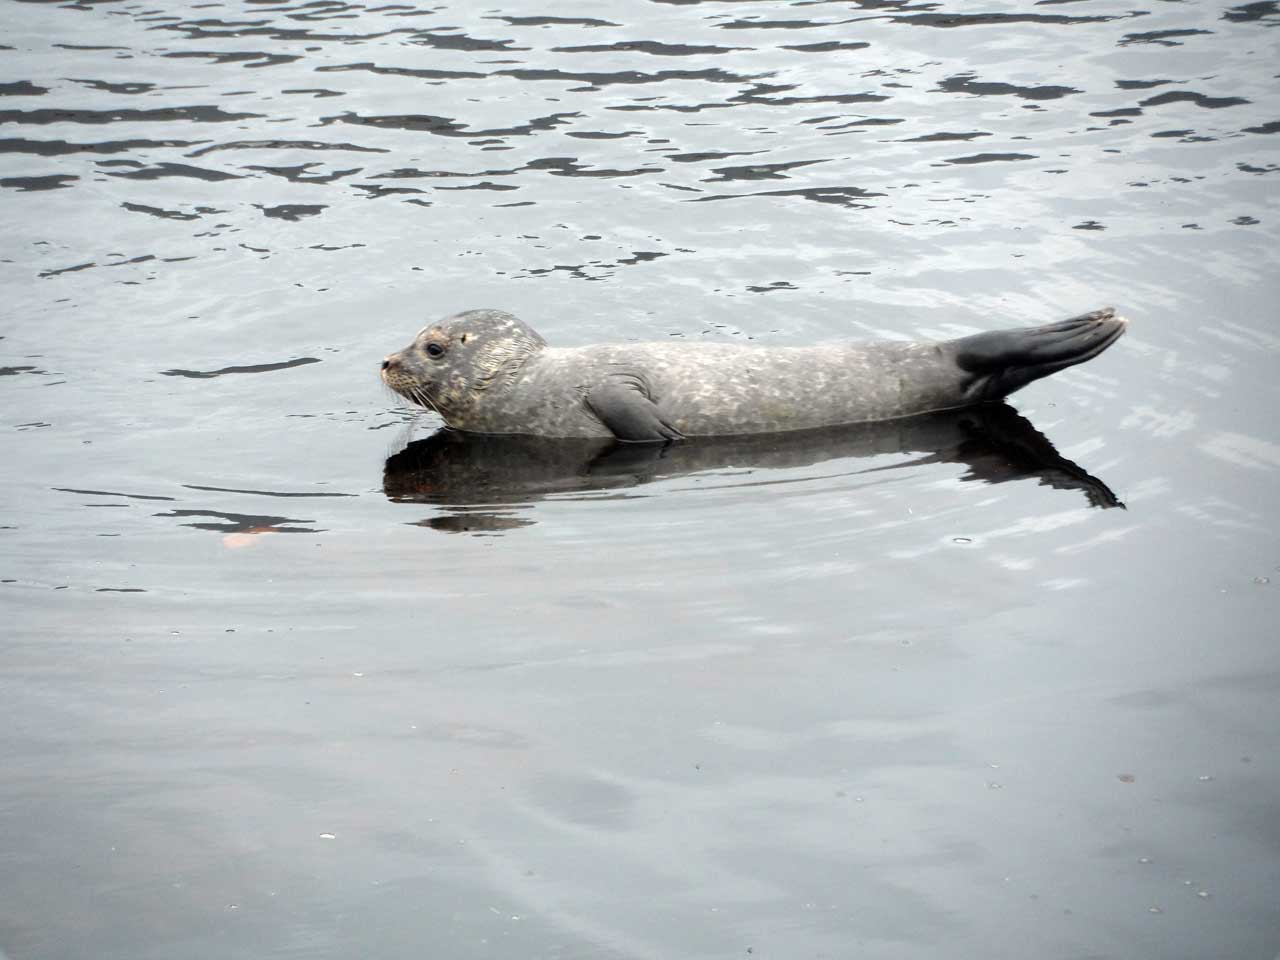 Photo: A Lone Seal On The Wick River